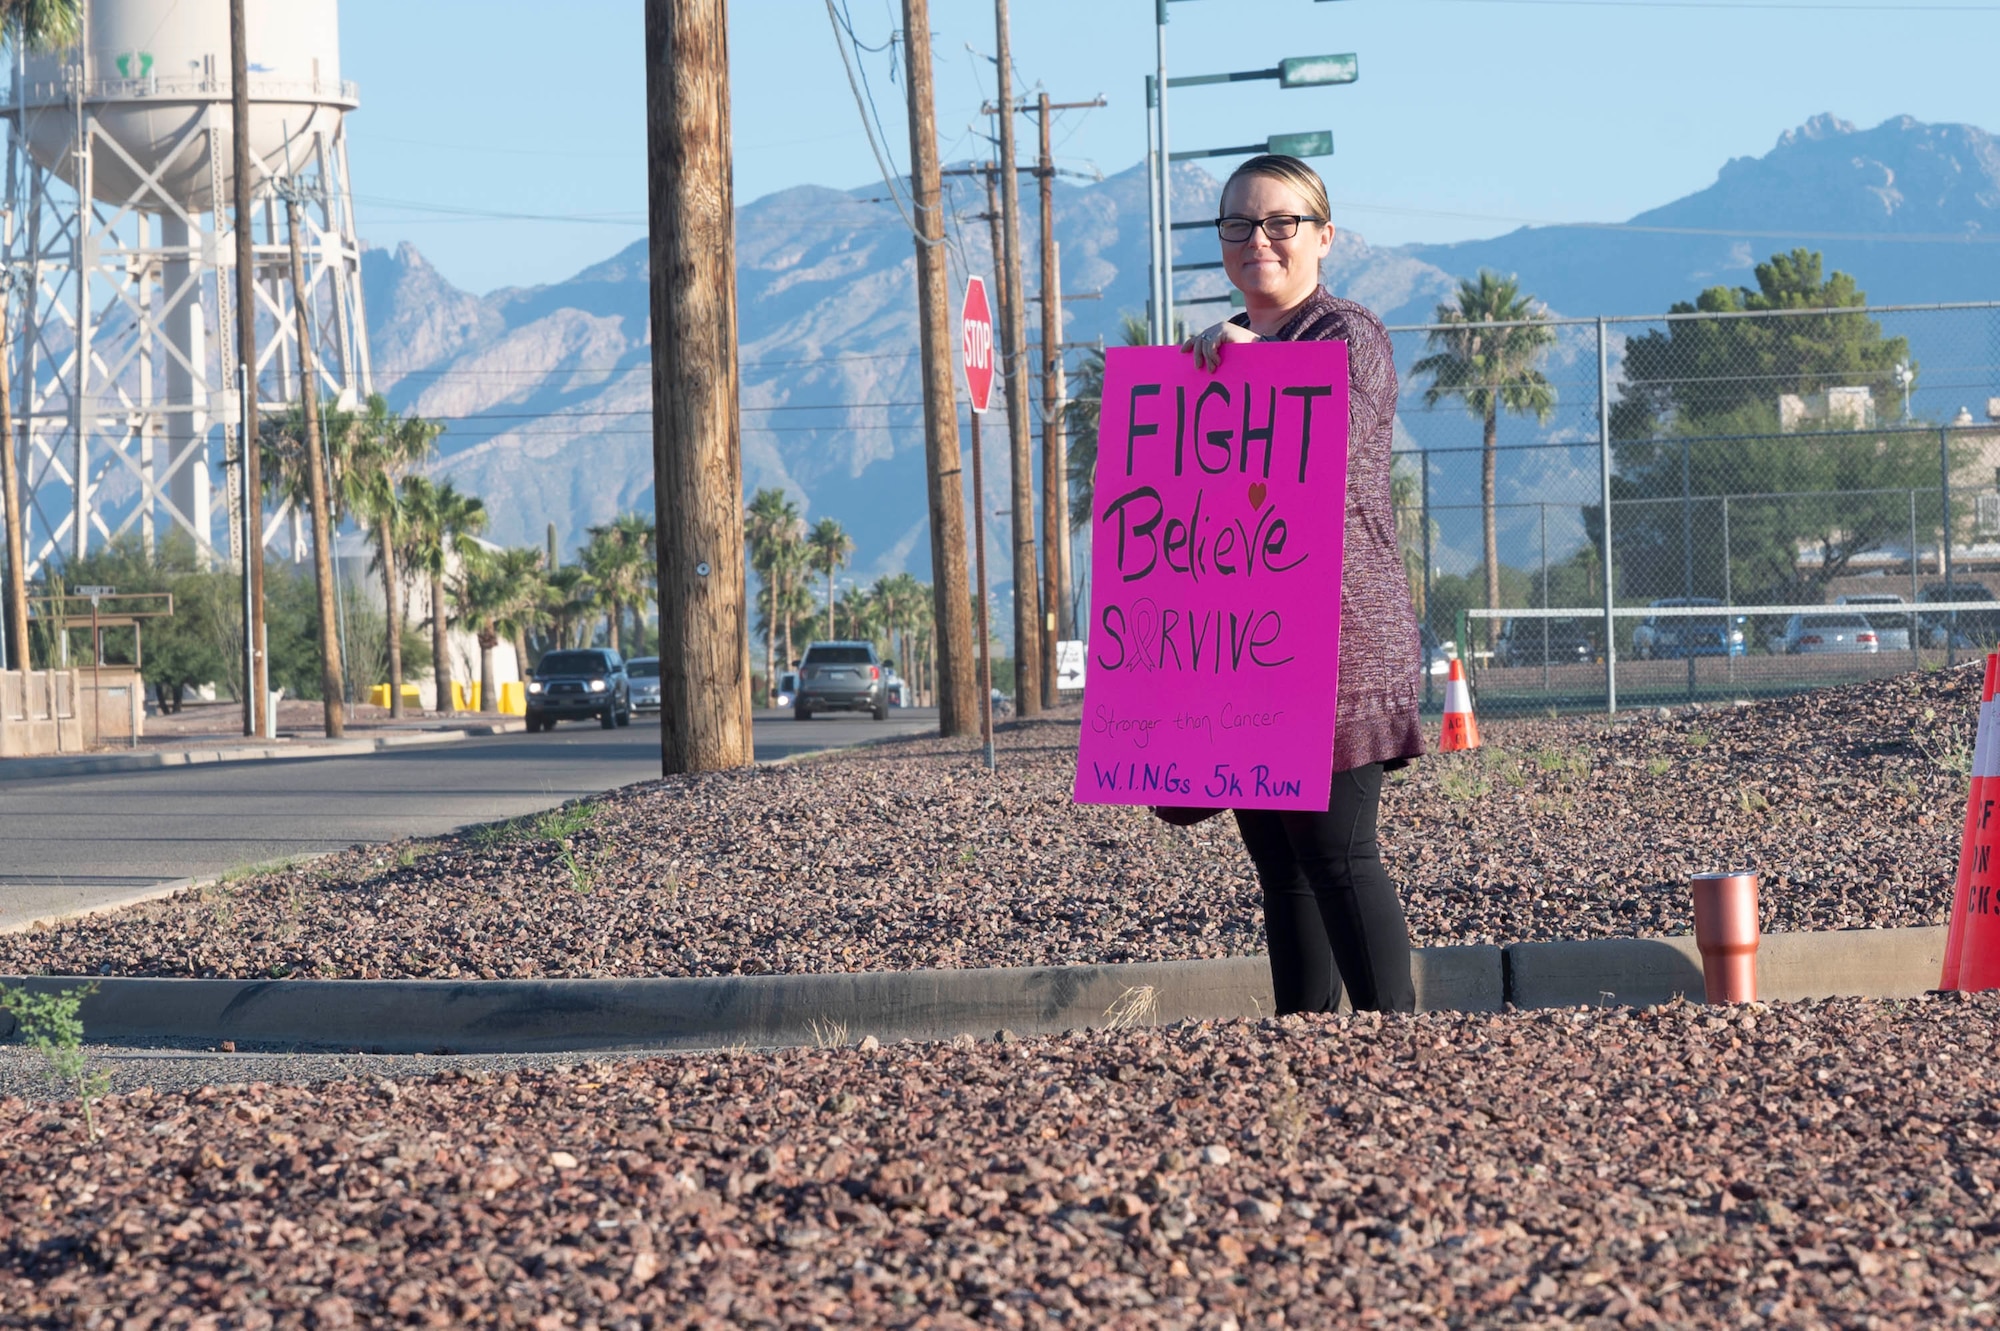 Pictured above is a woman holding a morale sign by a road.